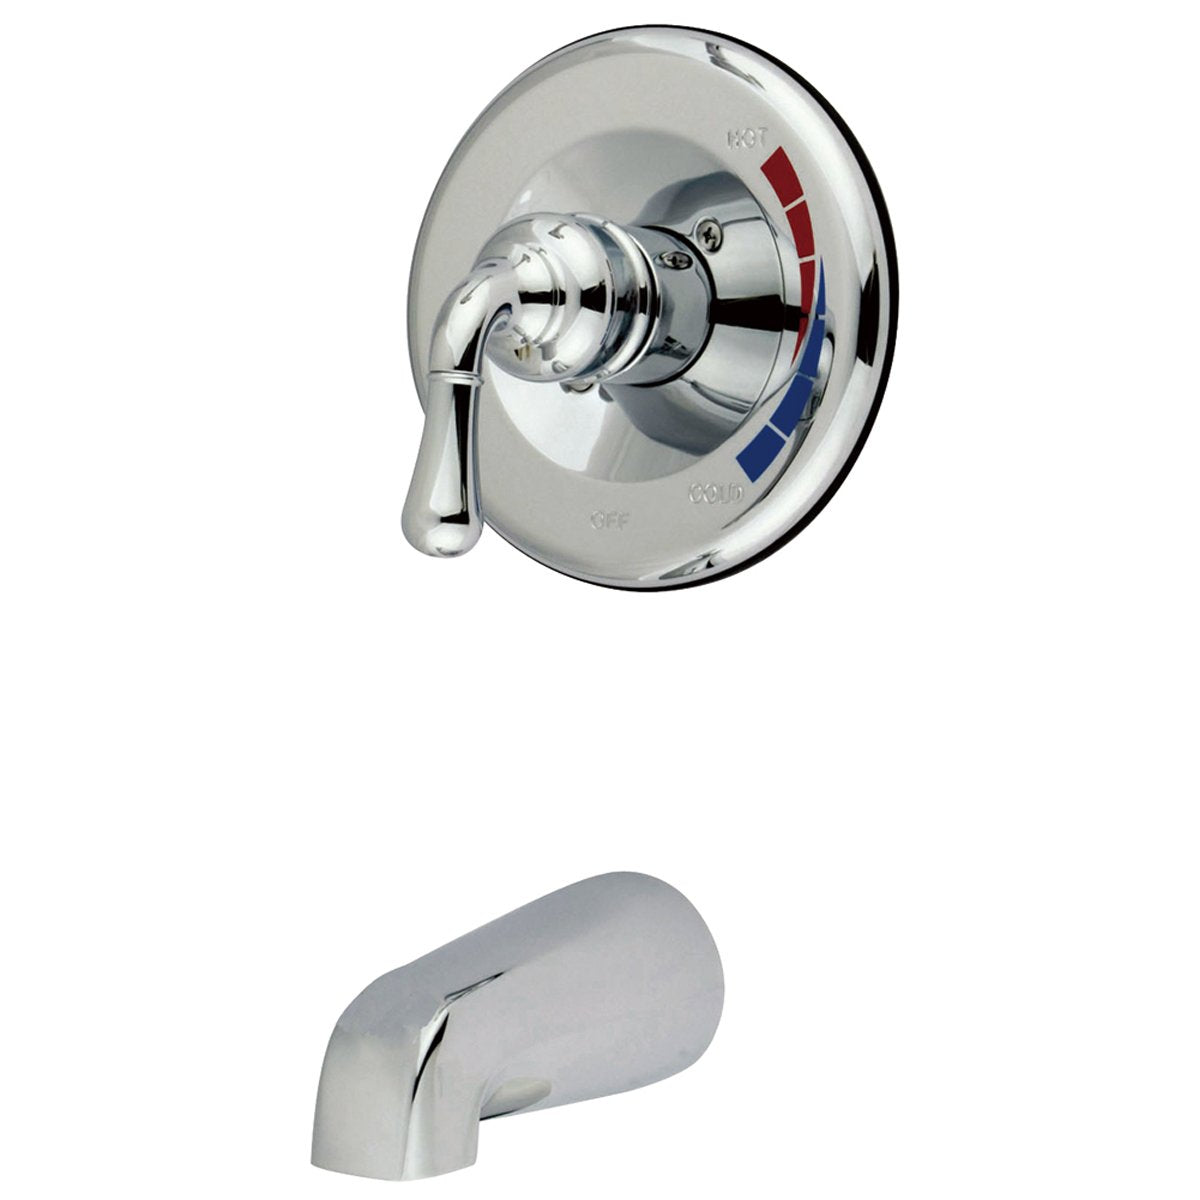 Kingston Brass Magellan Single Handle Tub Faucet in Polished Chrome-Tub Faucets-Free Shipping-Directsinks.